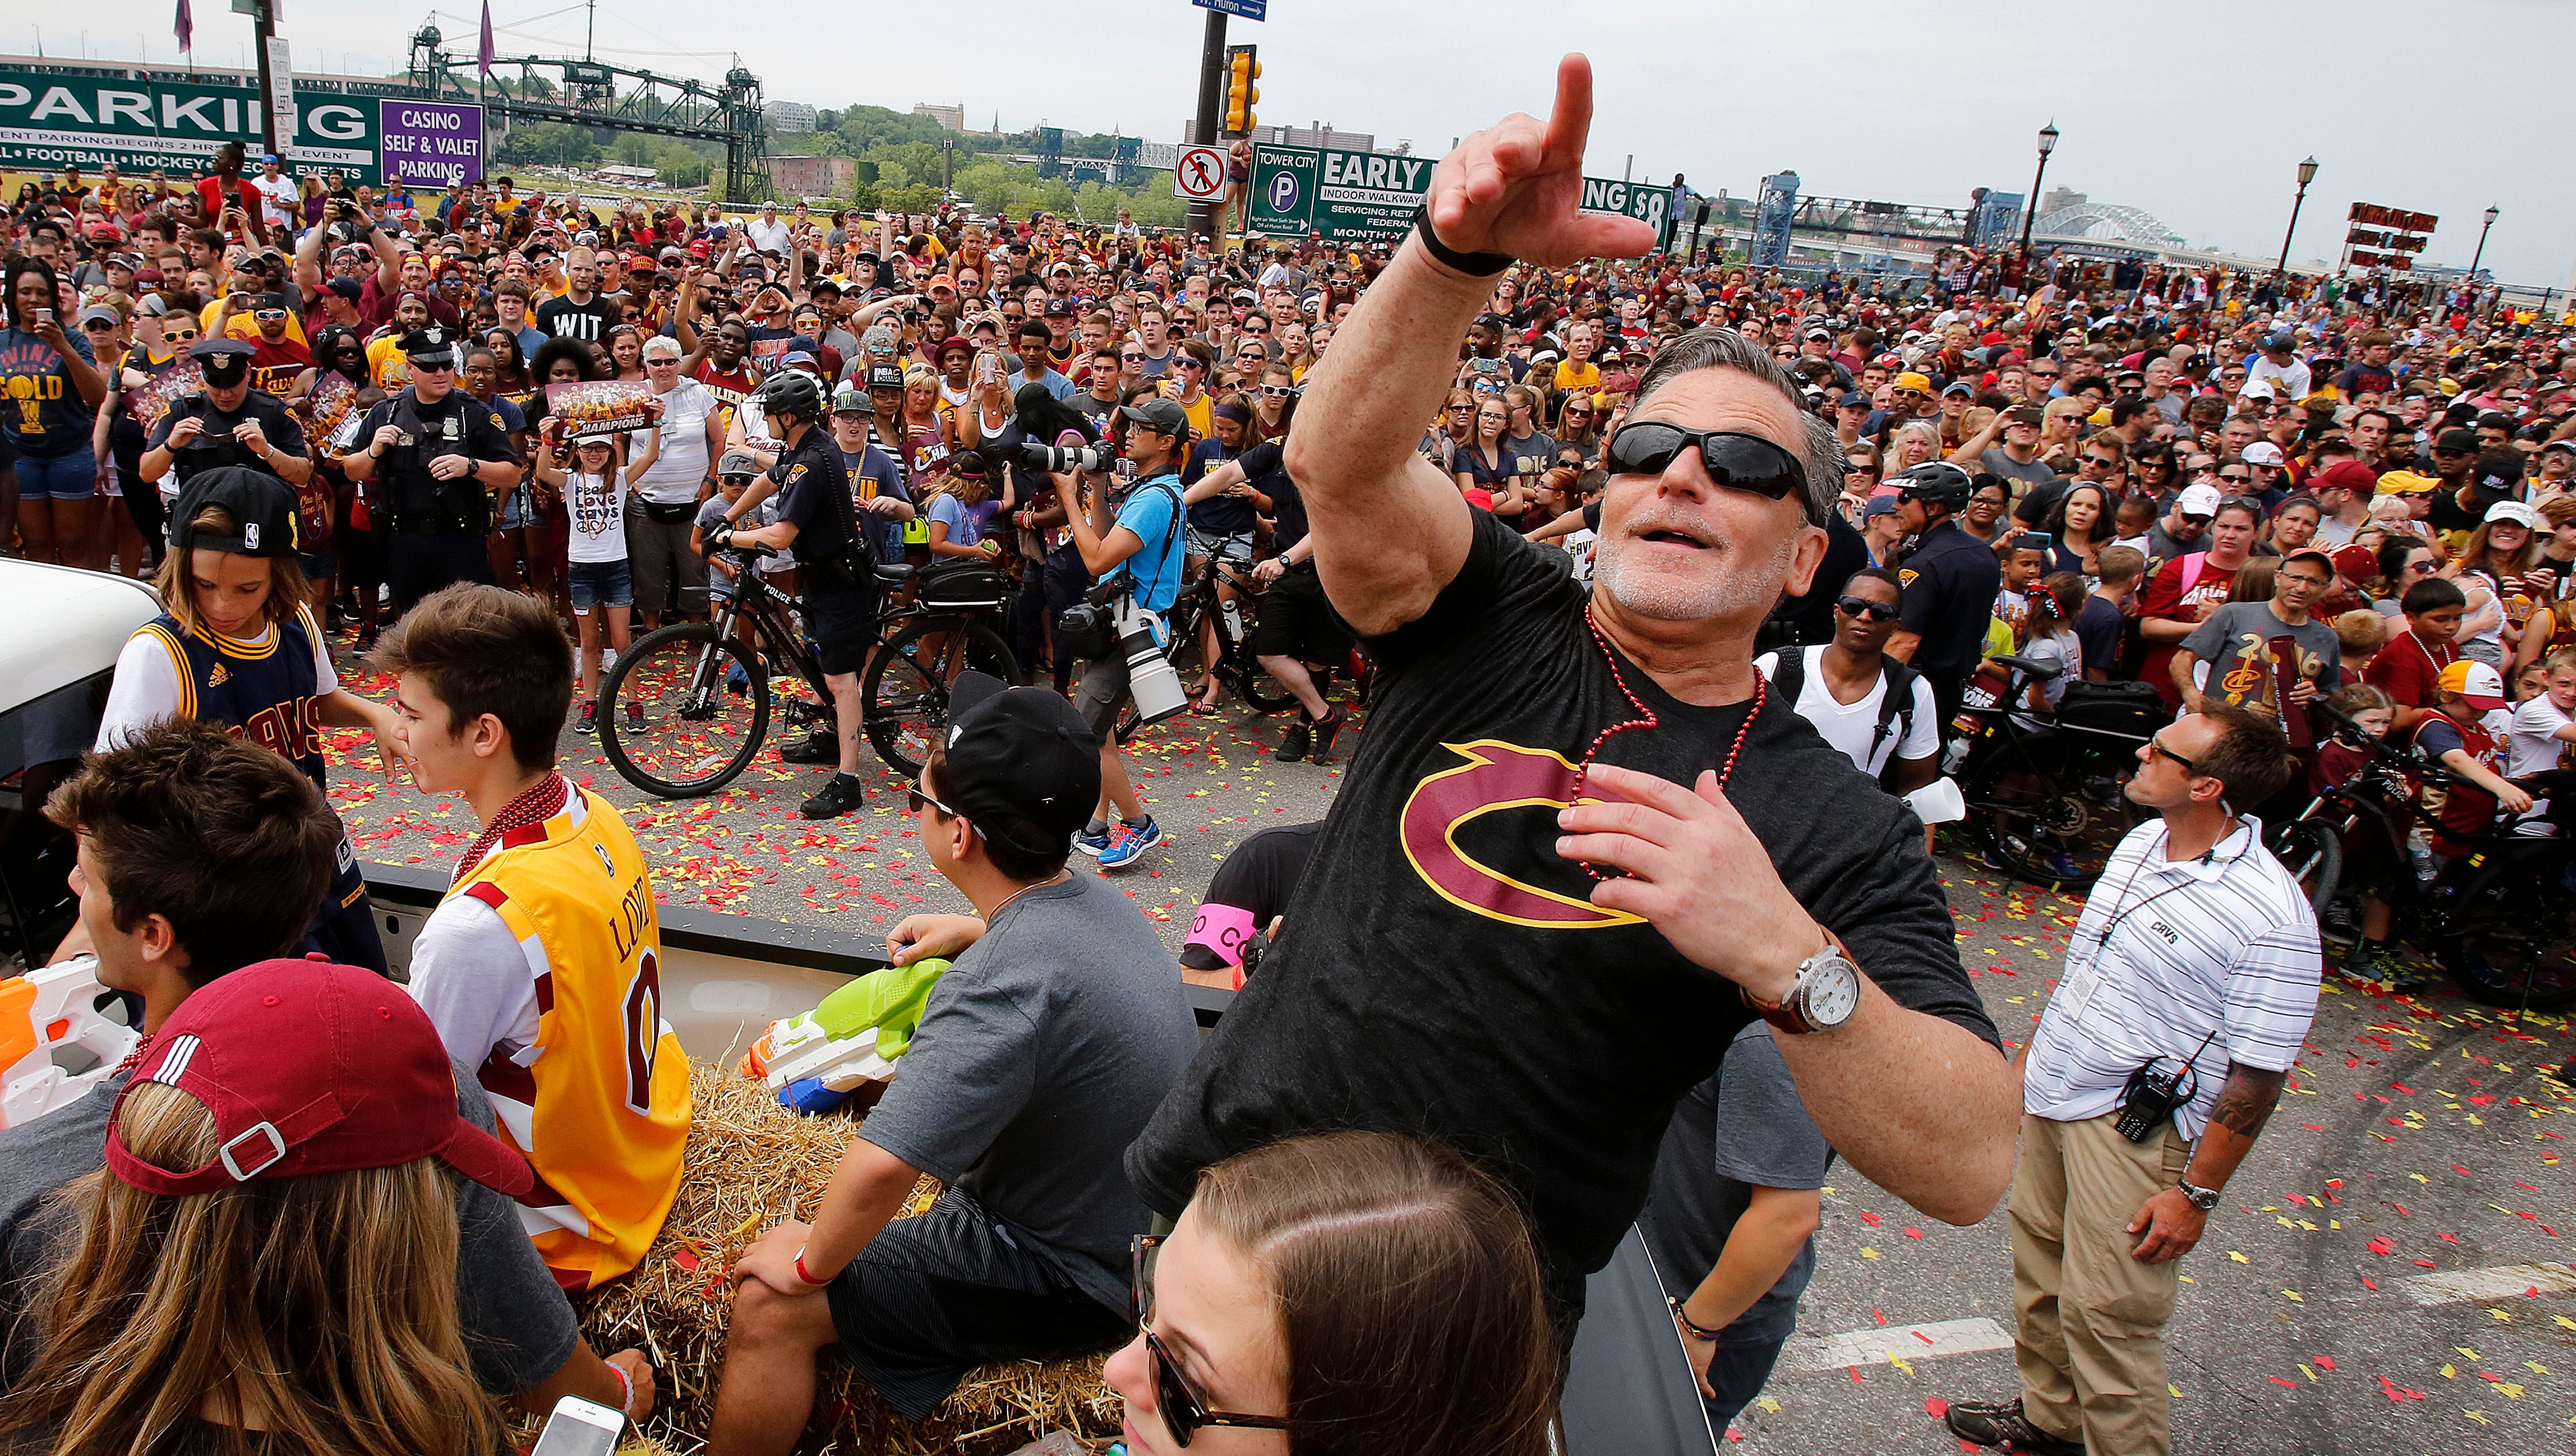 Cleveland Cavaliers owner Dan Gilbert tosses glass beads into the crowd during a parade celebrating the Cleveland Cavaliers' NBA Championship in downtown Cleveland Wednesday, June 22, 2016.